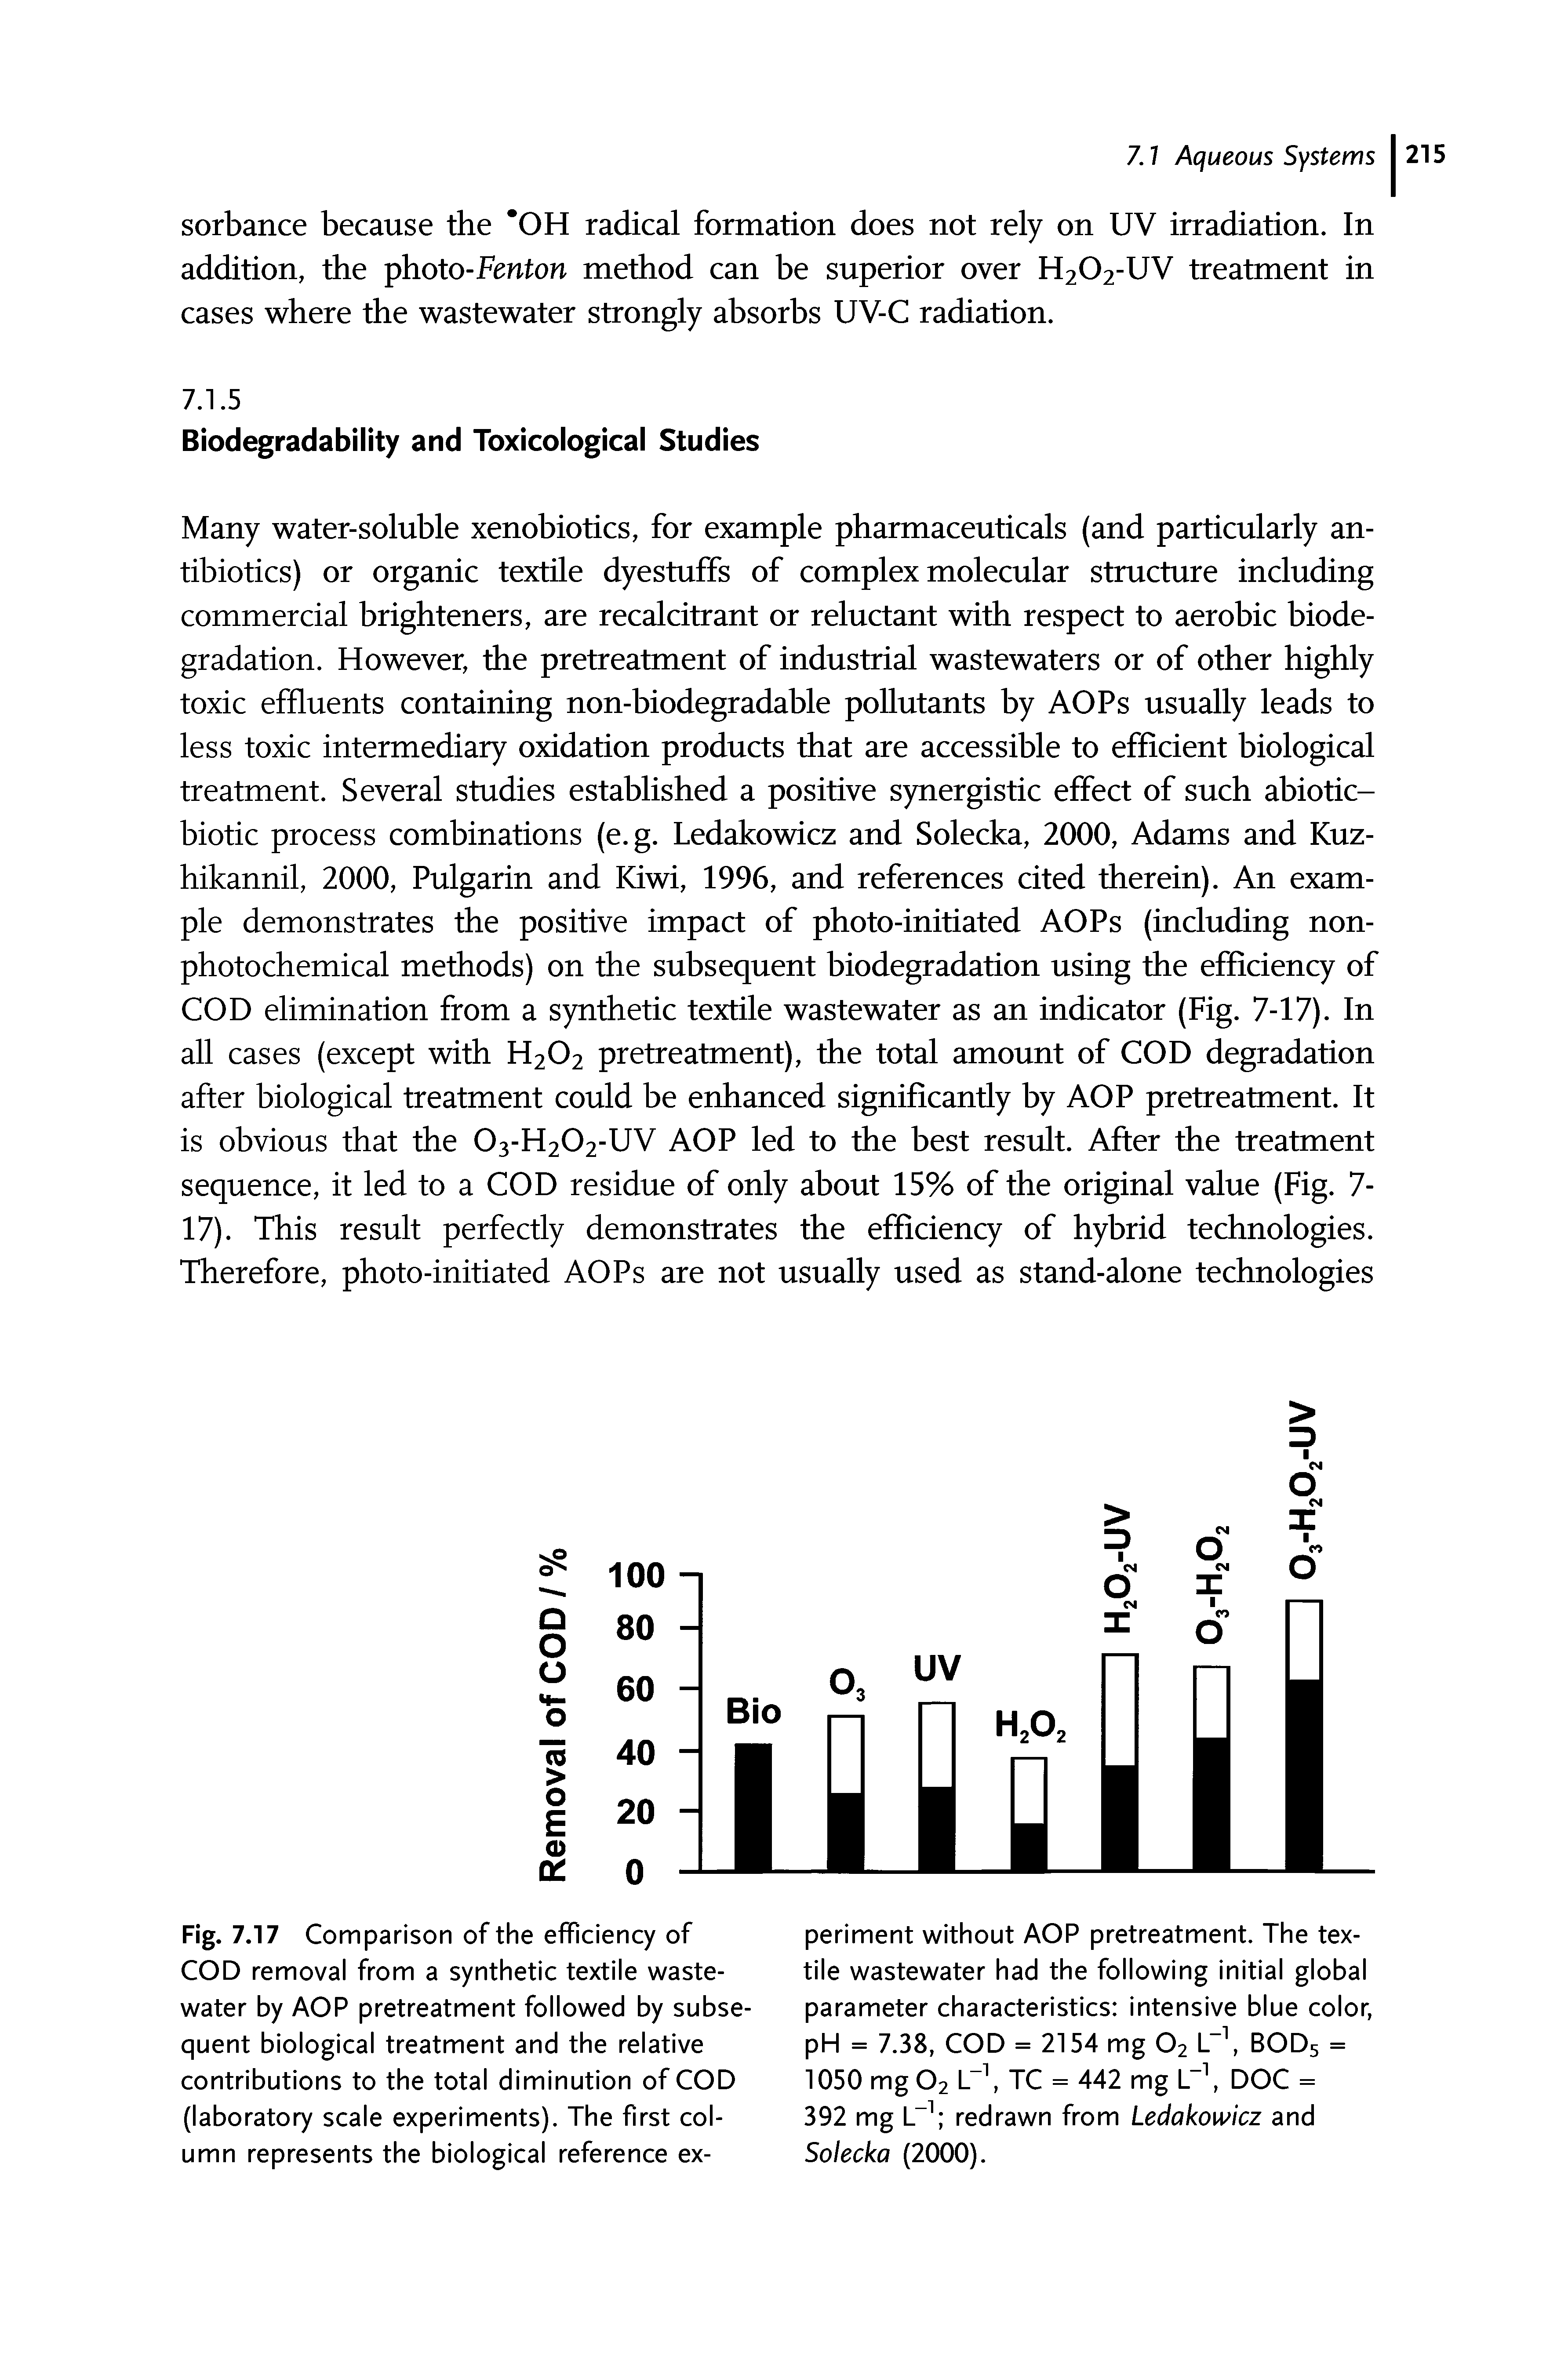 Fig. 7.17 Comparison of the efficiency of COD removal from a synthetic textile waste-water by AOP pretreatment followed by subsequent biological treatment and the relative contributions to the total diminution of COD (laboratory scale experiments). The first column represents the biological reference ex-...